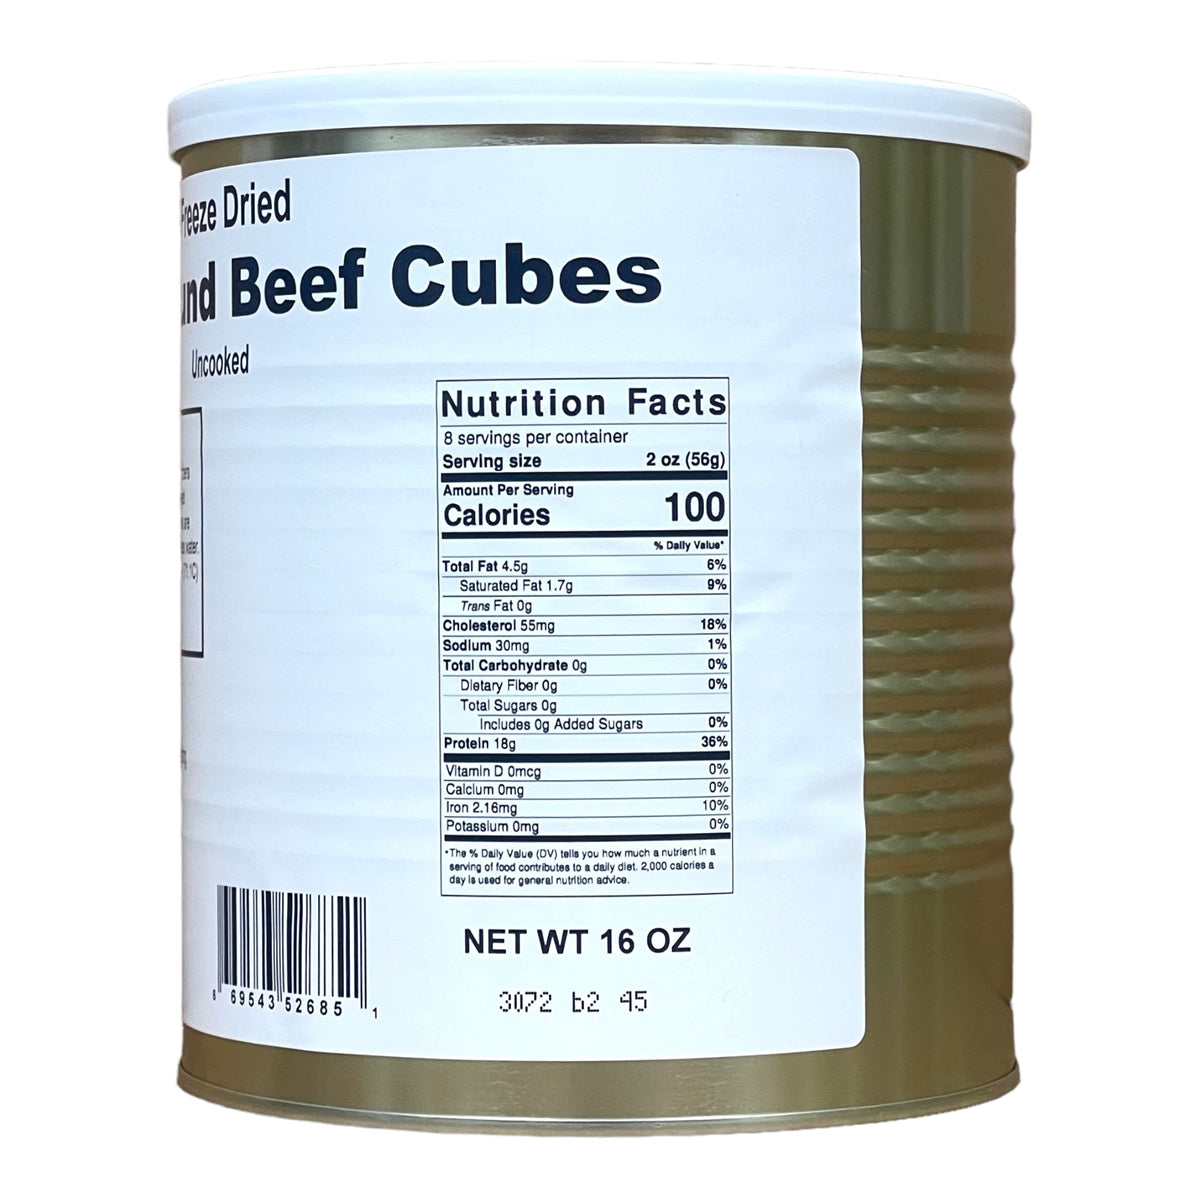 Military Surplus Freeze Dried Top Round Beef Cubes